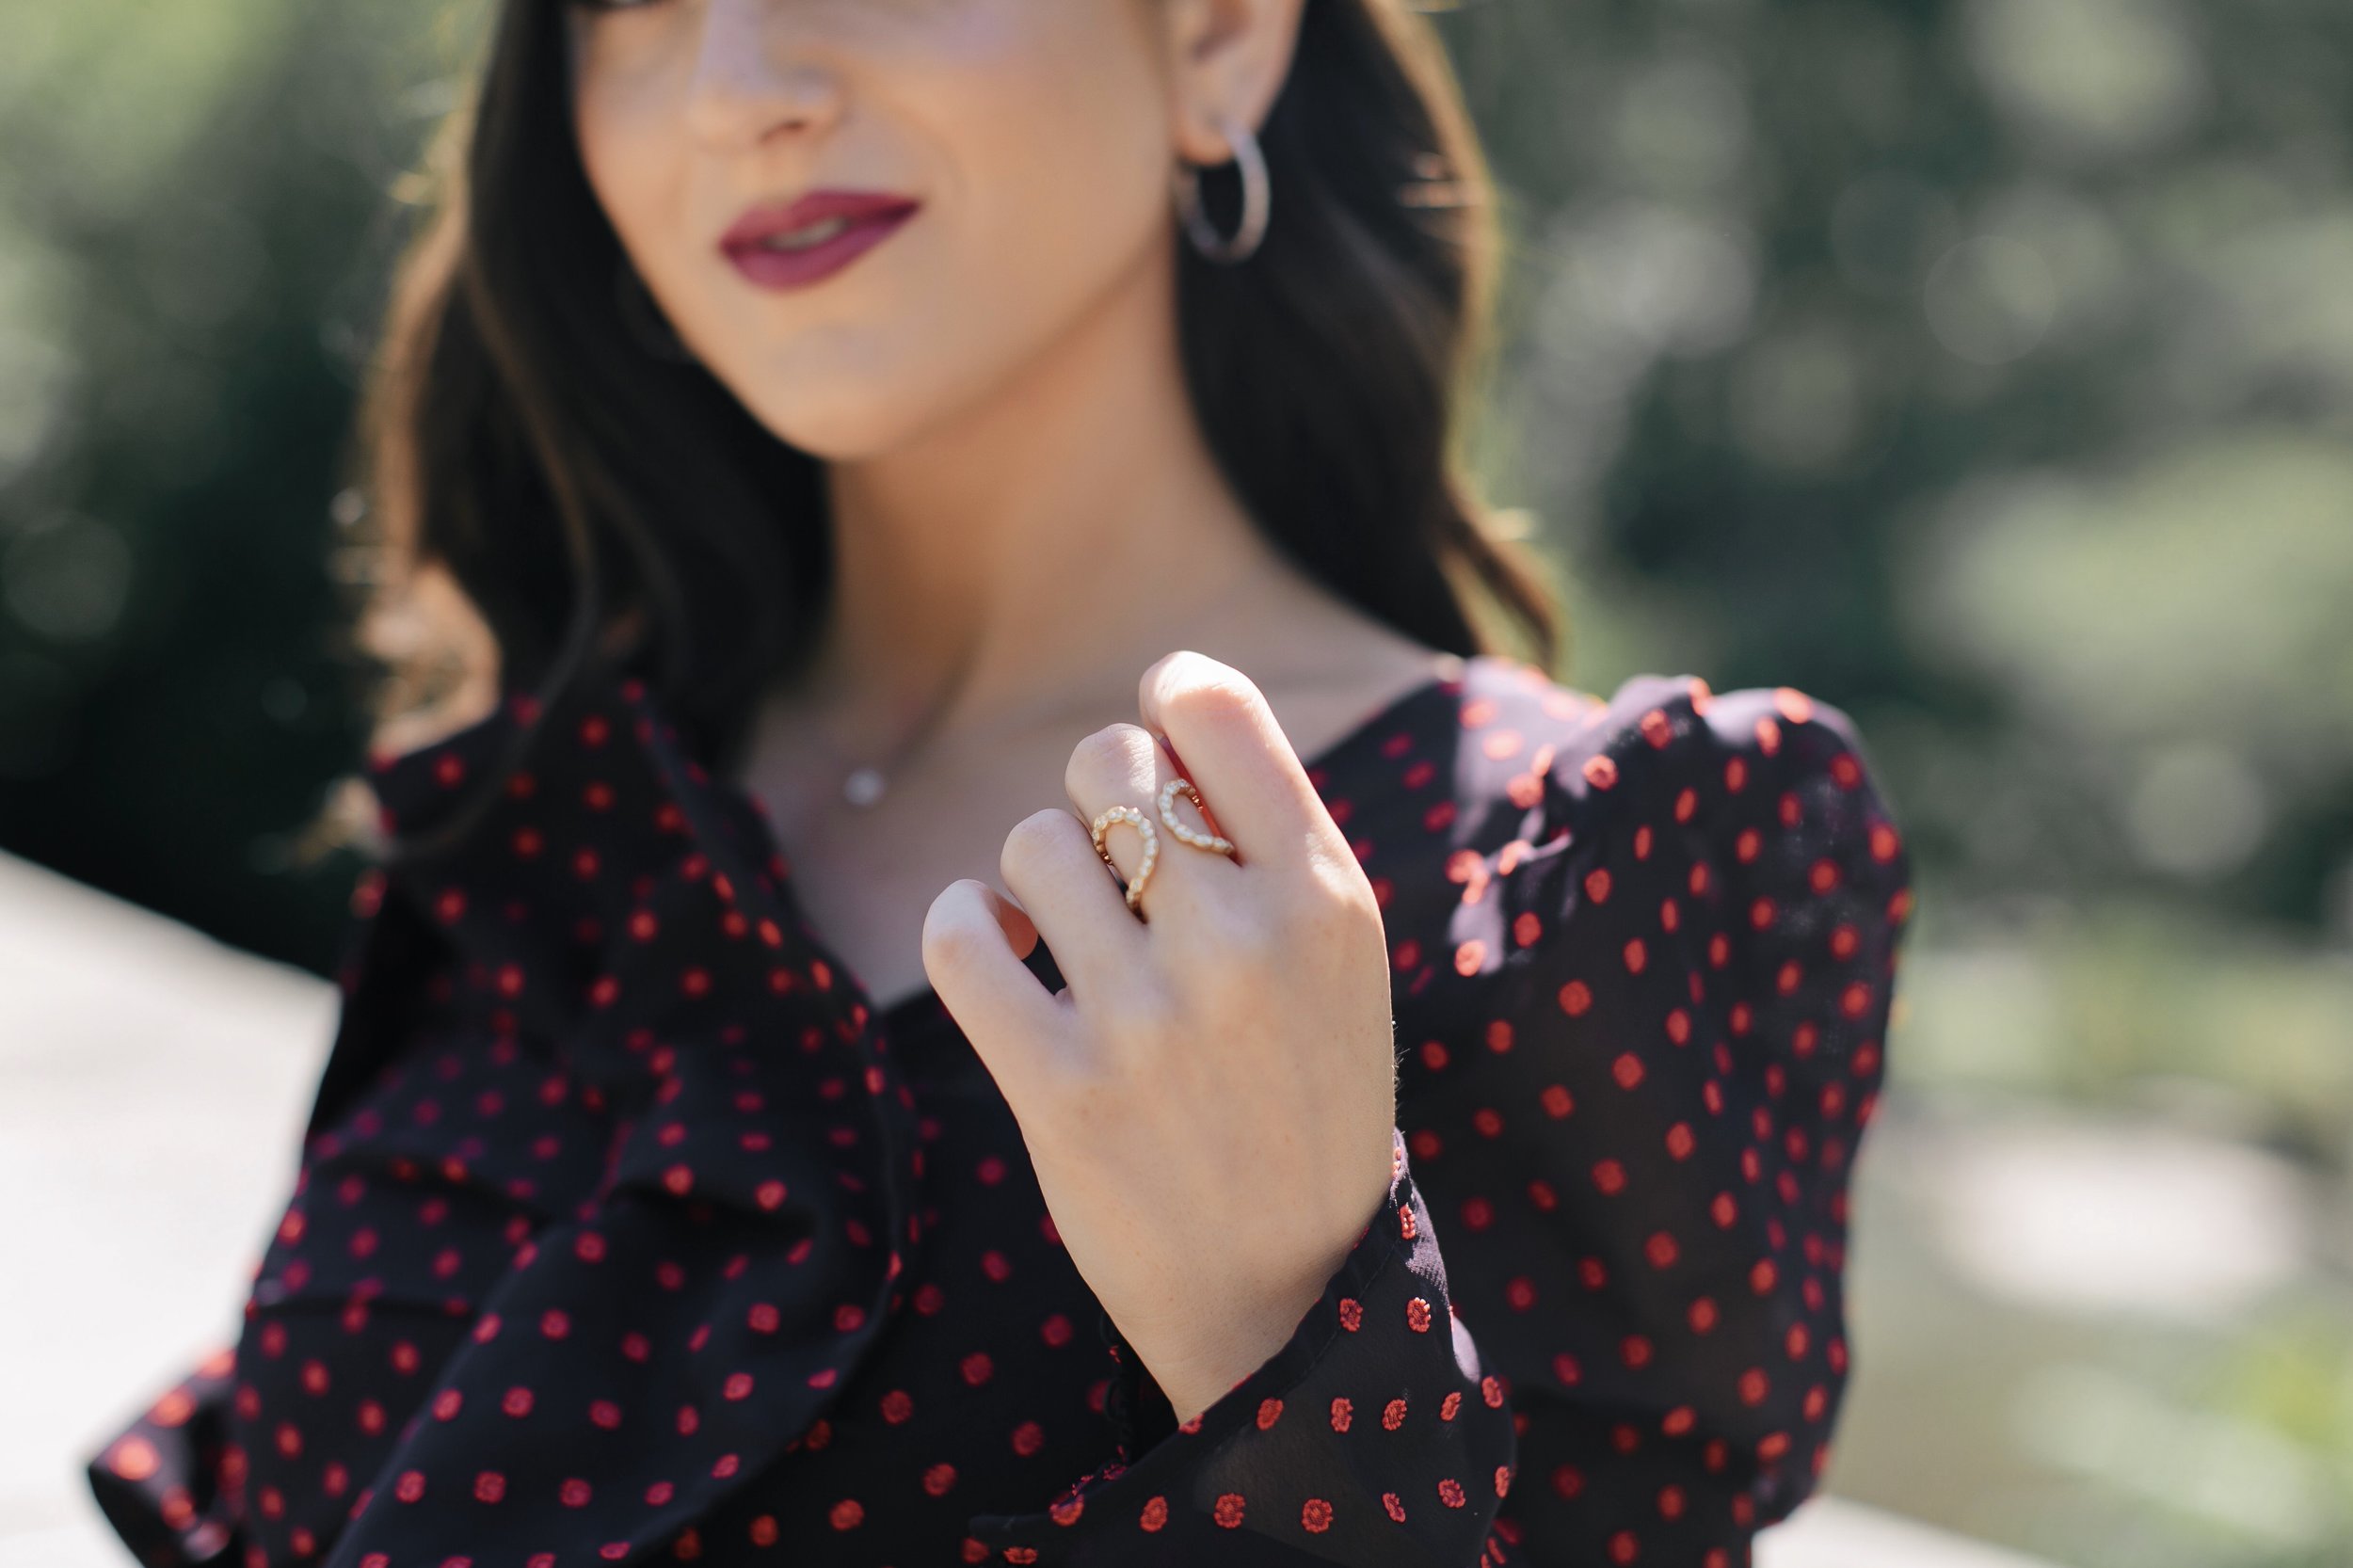 Decked Out In Diamonds Hearts On Fire Esther Santer NYC Street Style Blogger Outfit Self Portrait Necklace Ring Earrings Pretty Beautiful Perfect Cut Outfit Polka Dot Print Photoshoot Central Park New York City Wear Lipstick Women Girl Shopping Luxury.jpg